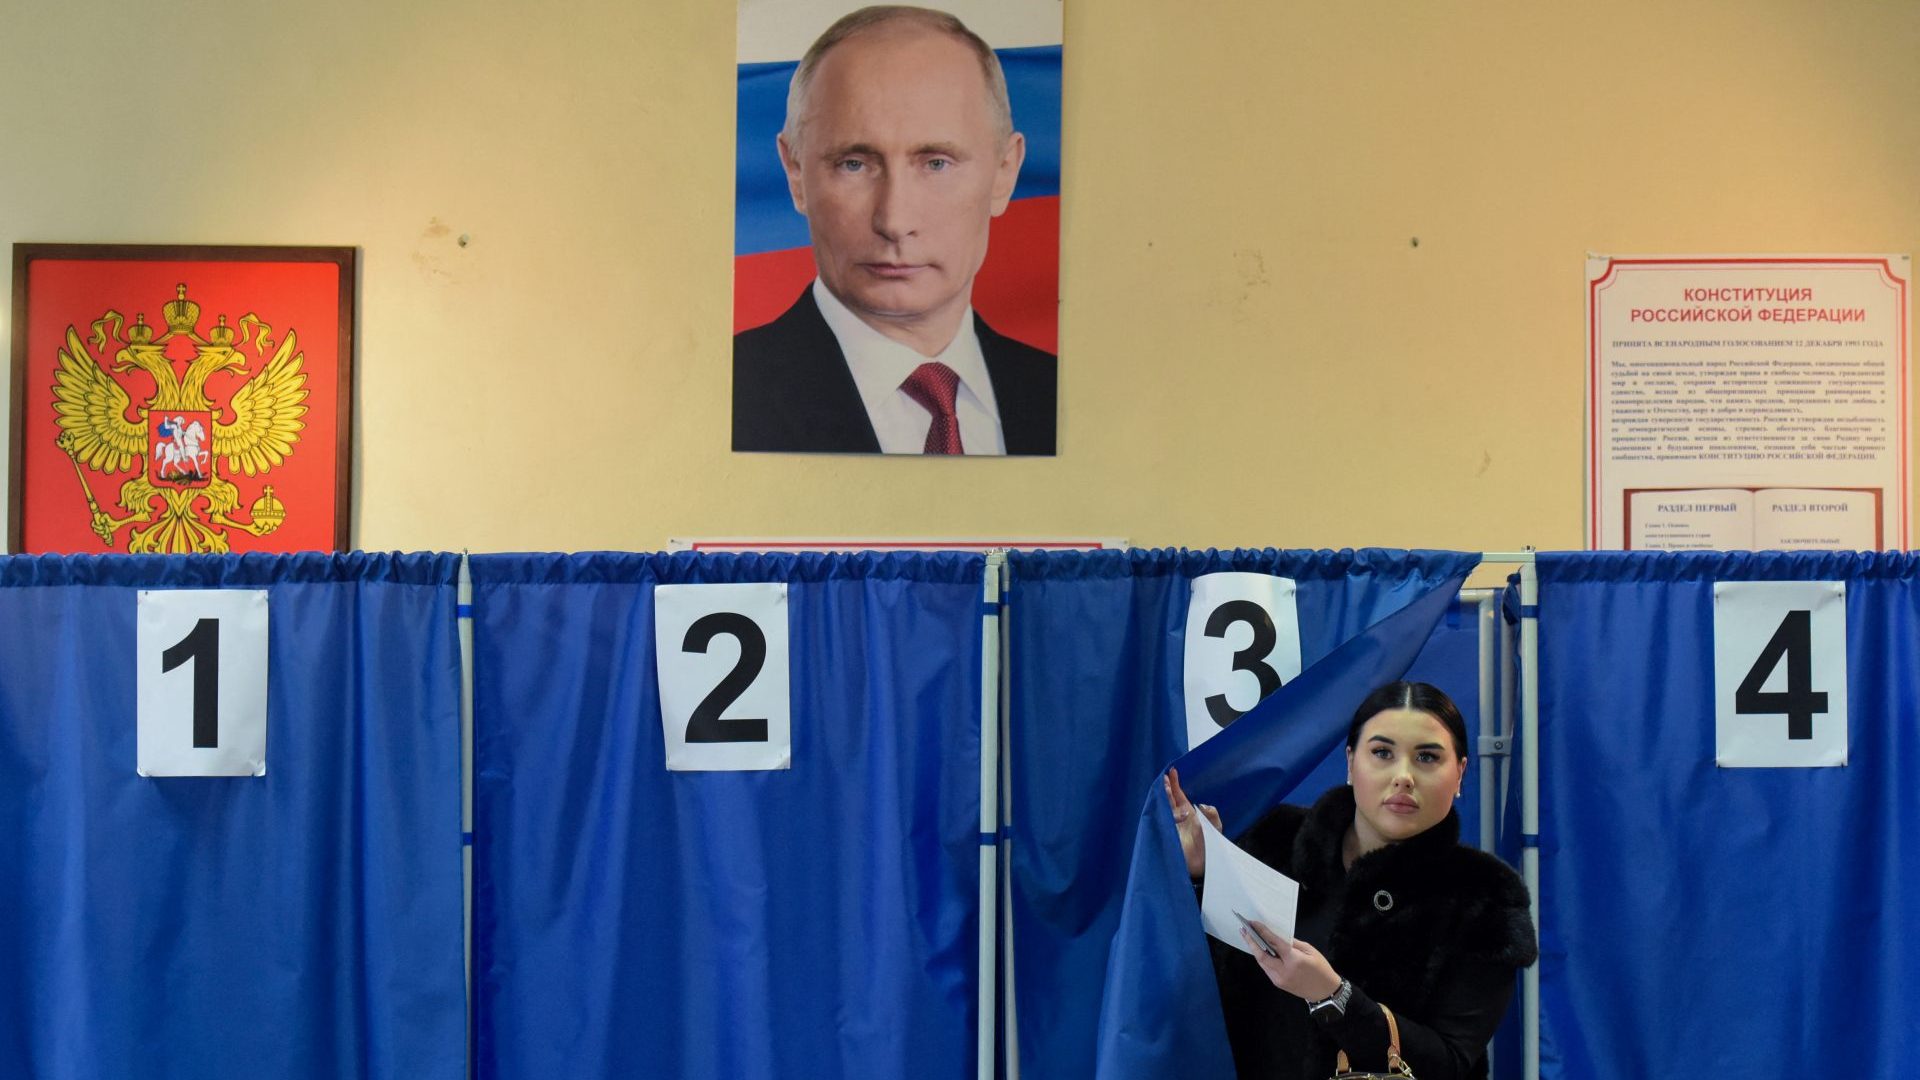 A woman votes in Russia's presidential election at a polling station in Donetsk, Russian-controlled Ukraine. Photo: STRINGER/AFP via Getty Images